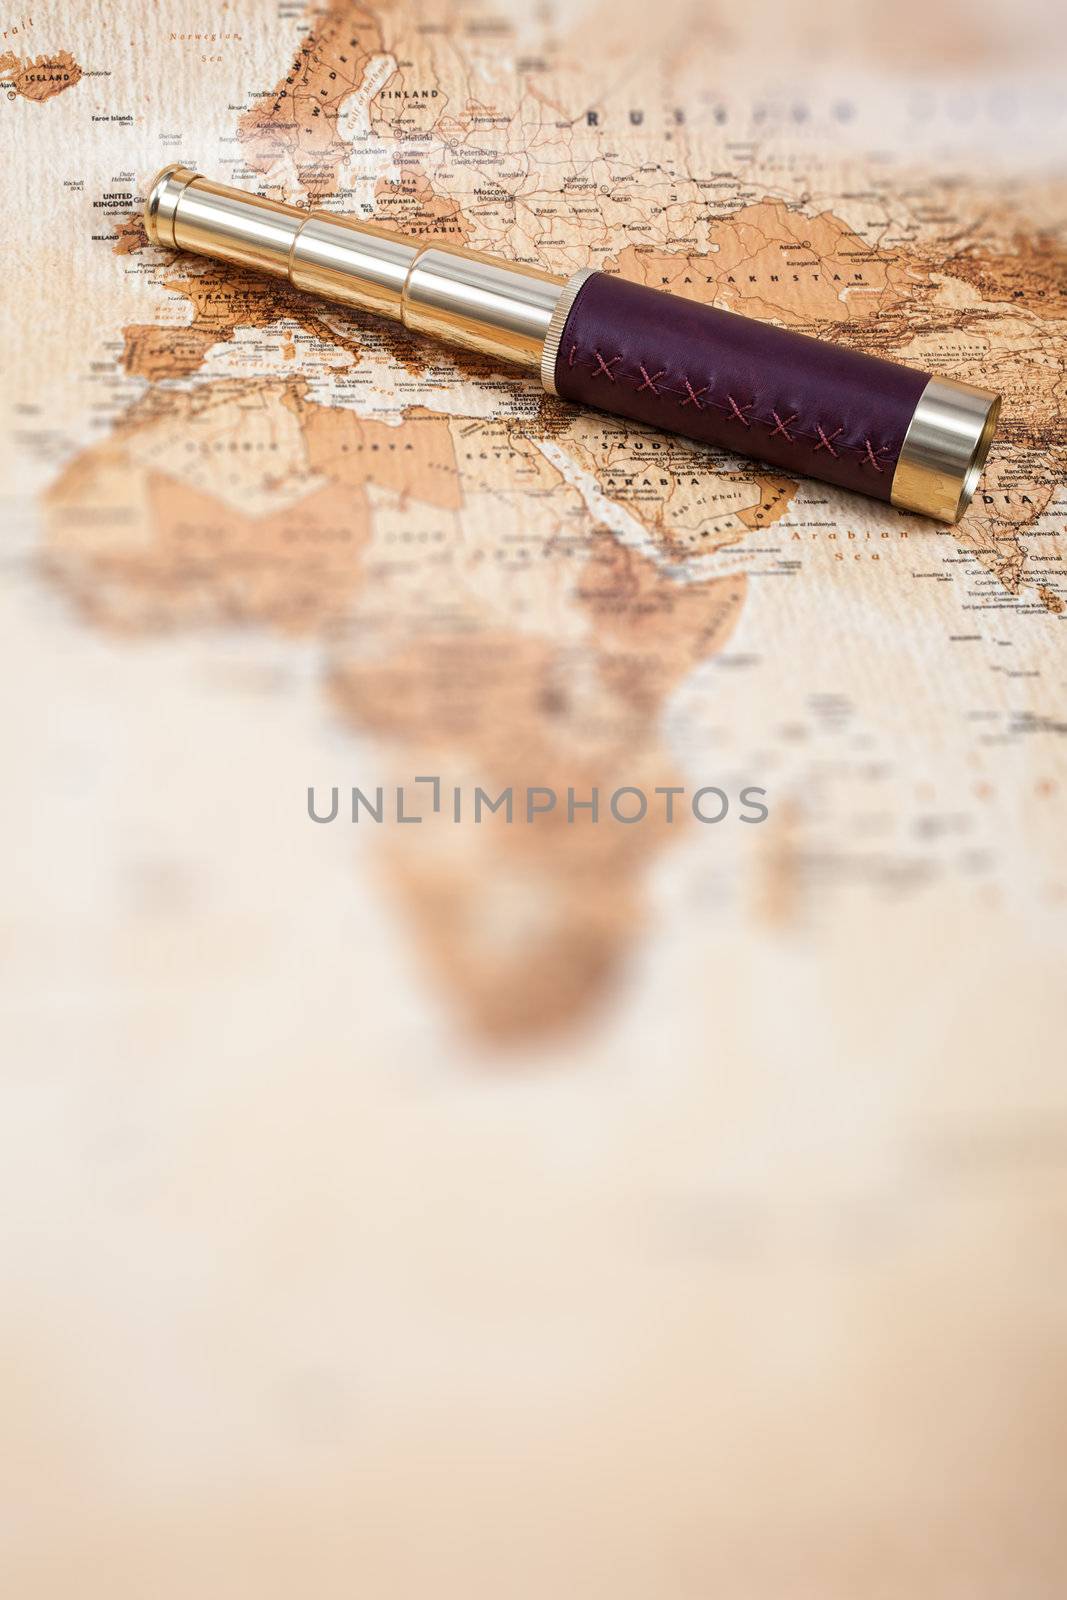 An antique, out of focus, map with a beautiful golden and leather telescope.